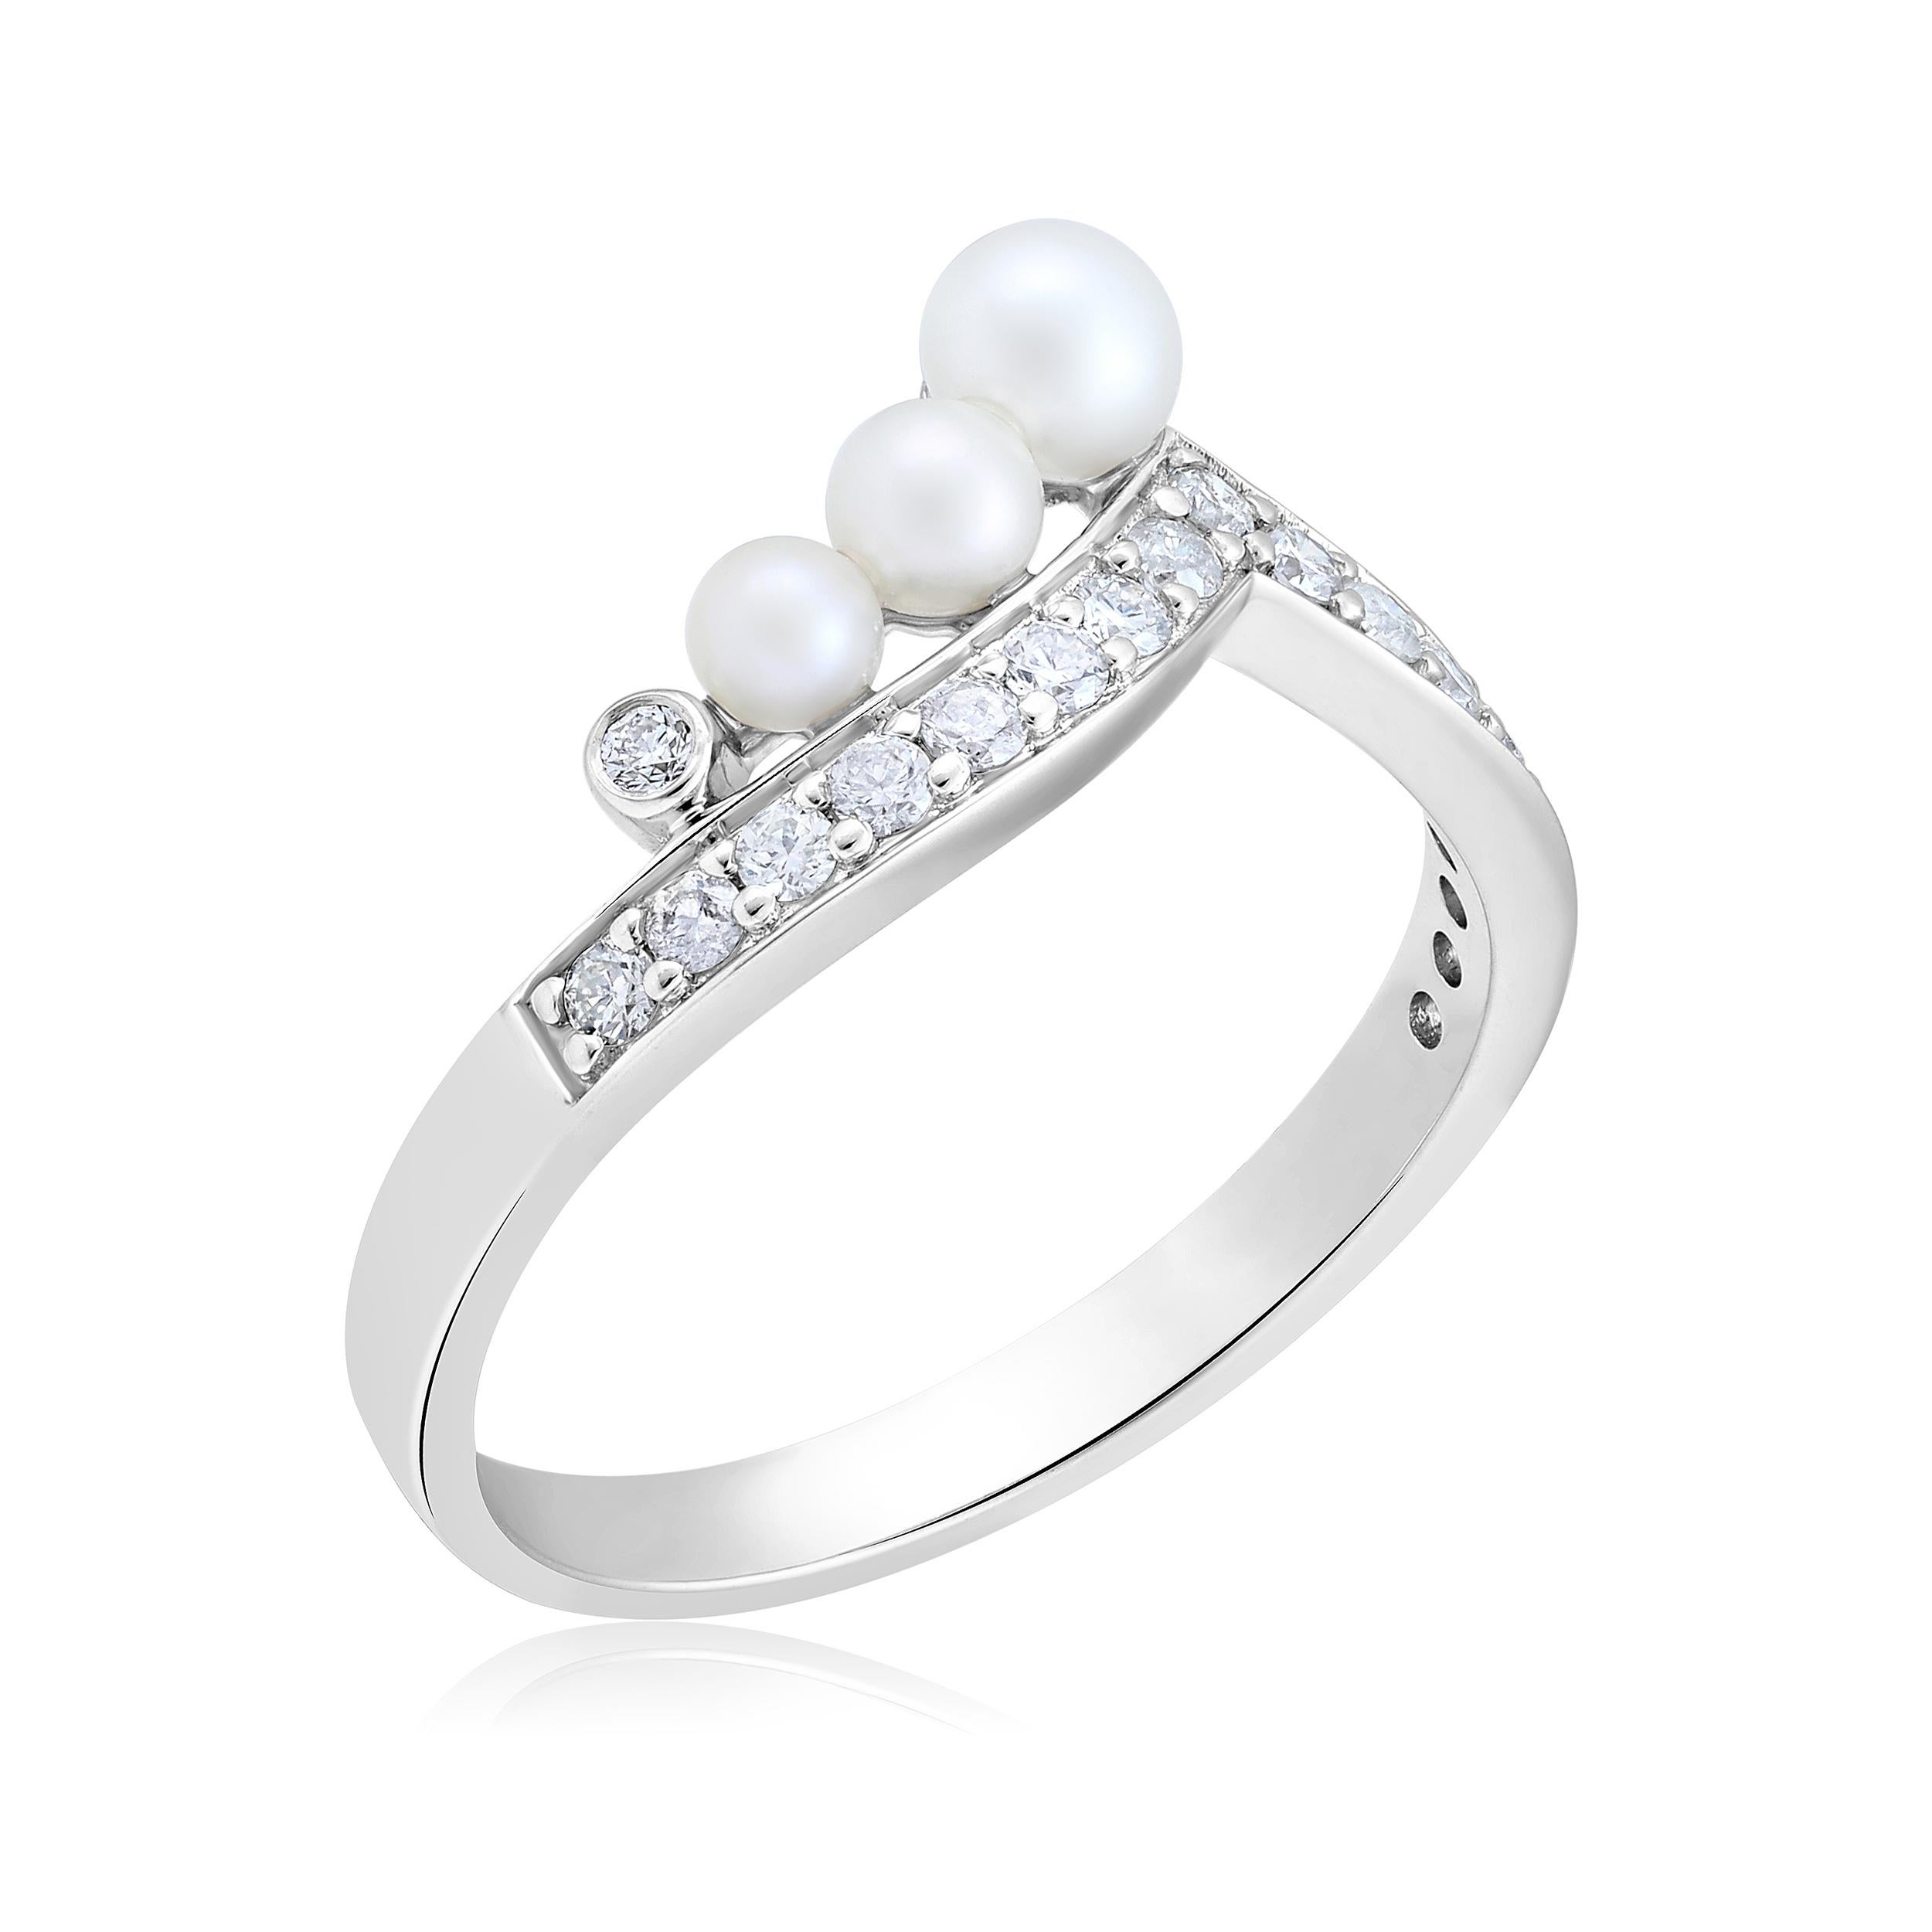 Ring Size: US 8 

Crafted in 2.89 grams of 14K White Gold, the ring contains 18 stones of Round Diamonds with a total of 0.32 carat in F-G color and I1-I2 clarity combined with 3 Cultured Pearls with a total of 0.96 carat.

CONTEMPORARY AND TIMELESS